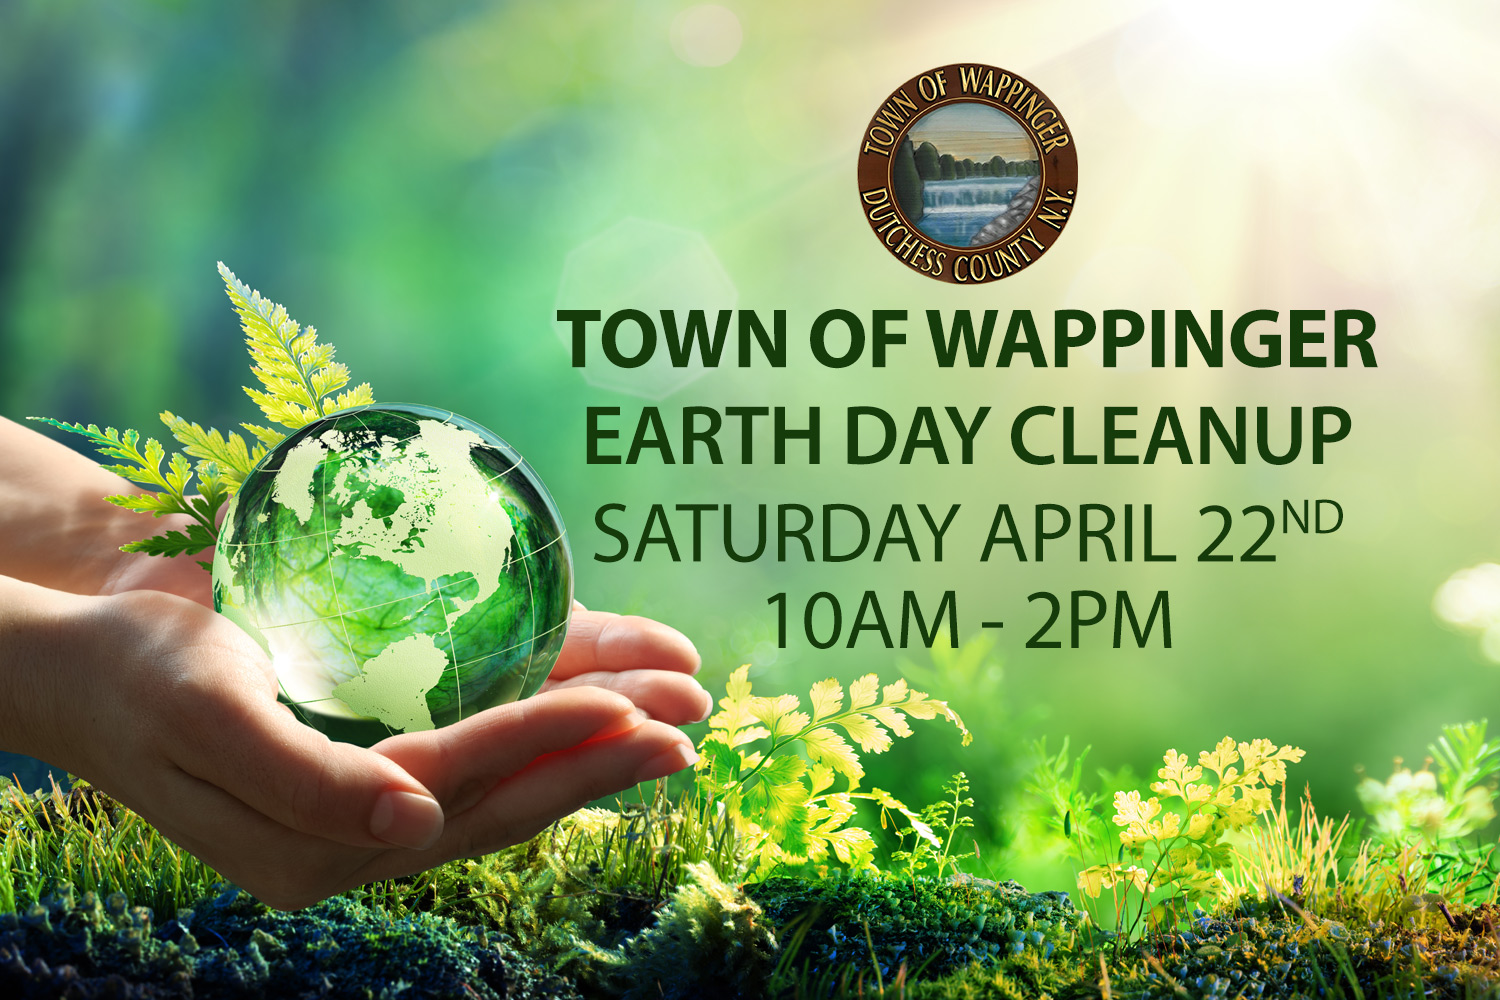 https://townofwappingerny.gov/wp-content/uploads/2023/04/Town-of-Wappinger-Earth-Day-Cleanup1500x1000web.jpg